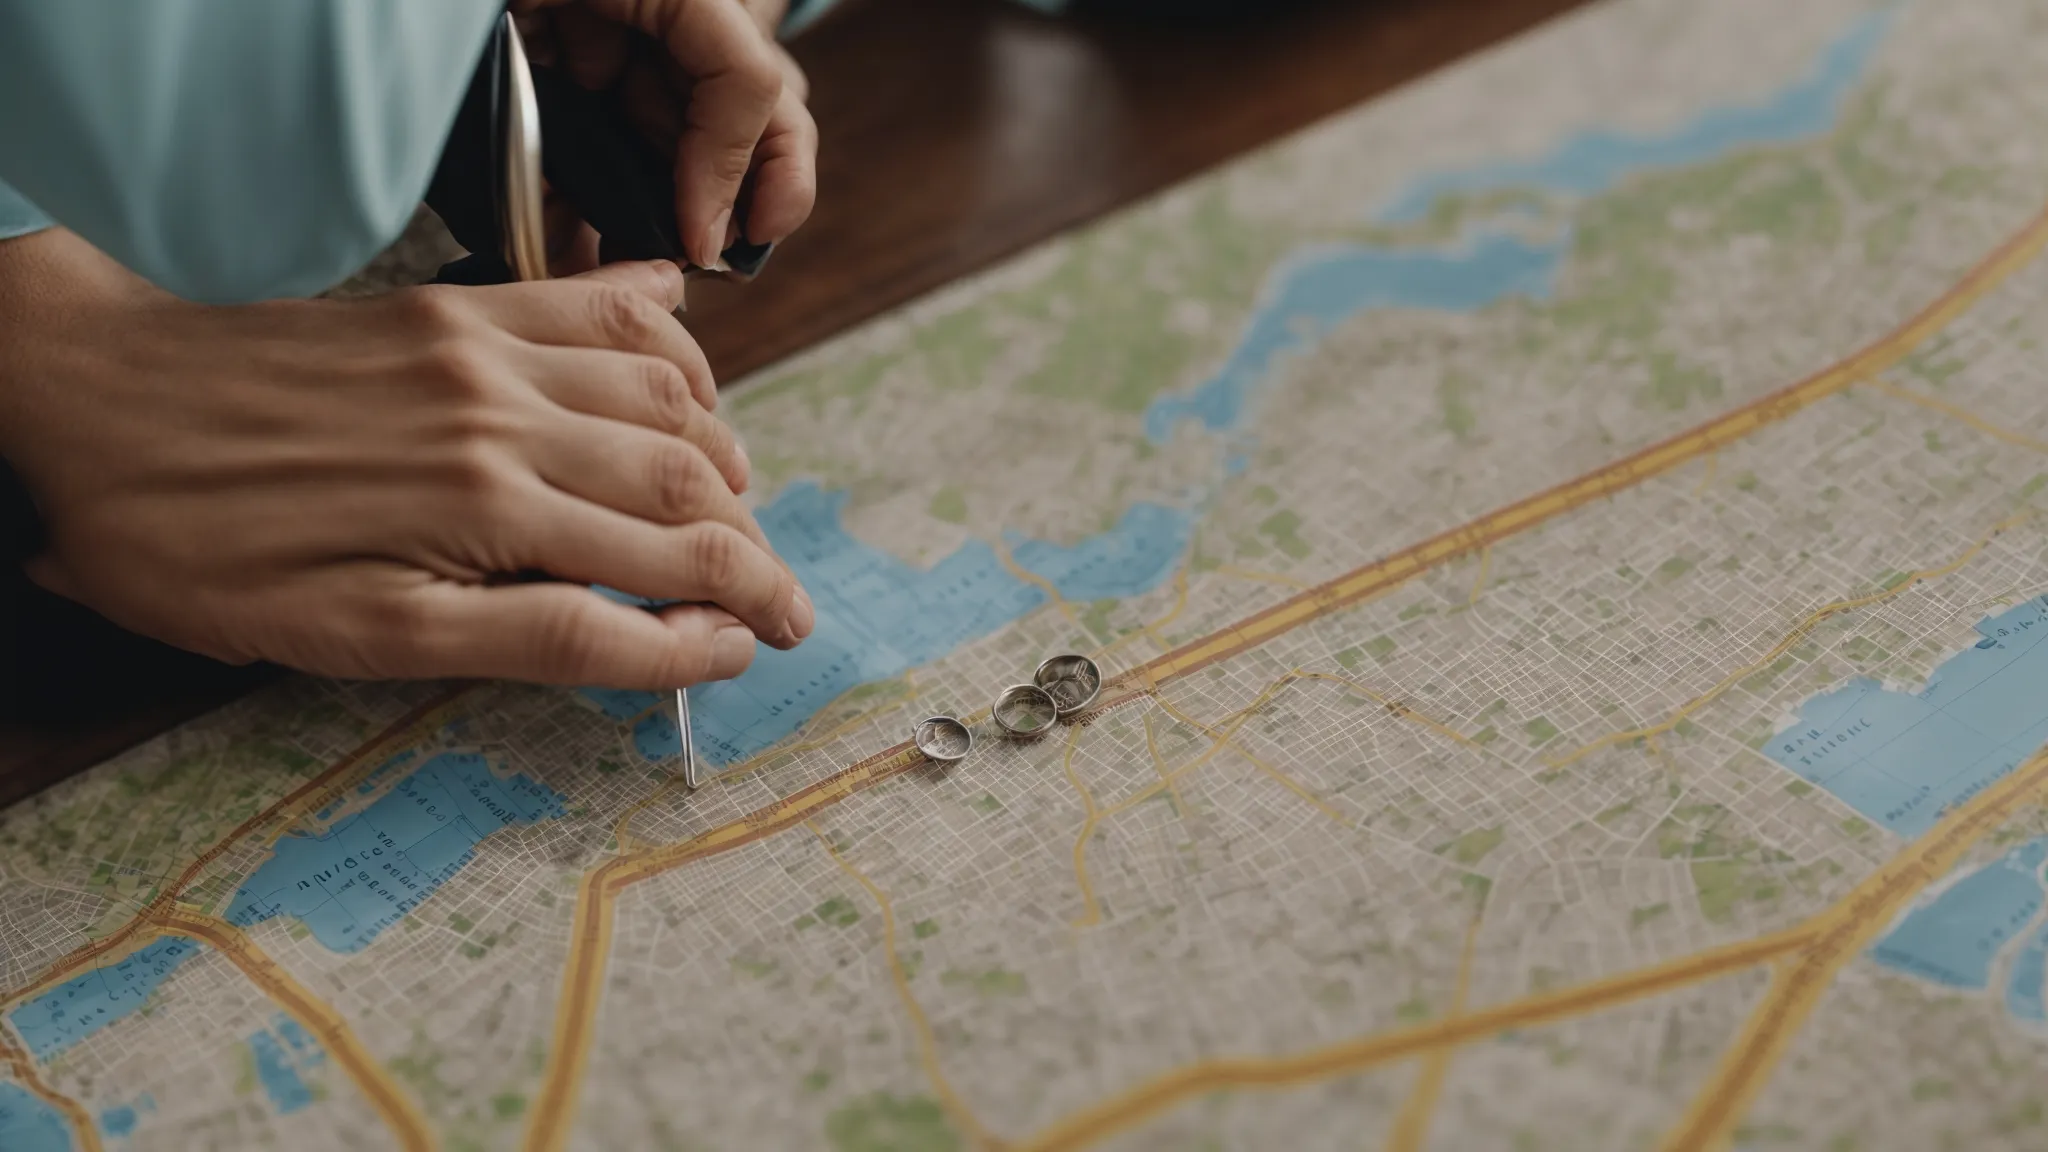 a small business owner placing a pin on a map of the local area to signify their shop's location.